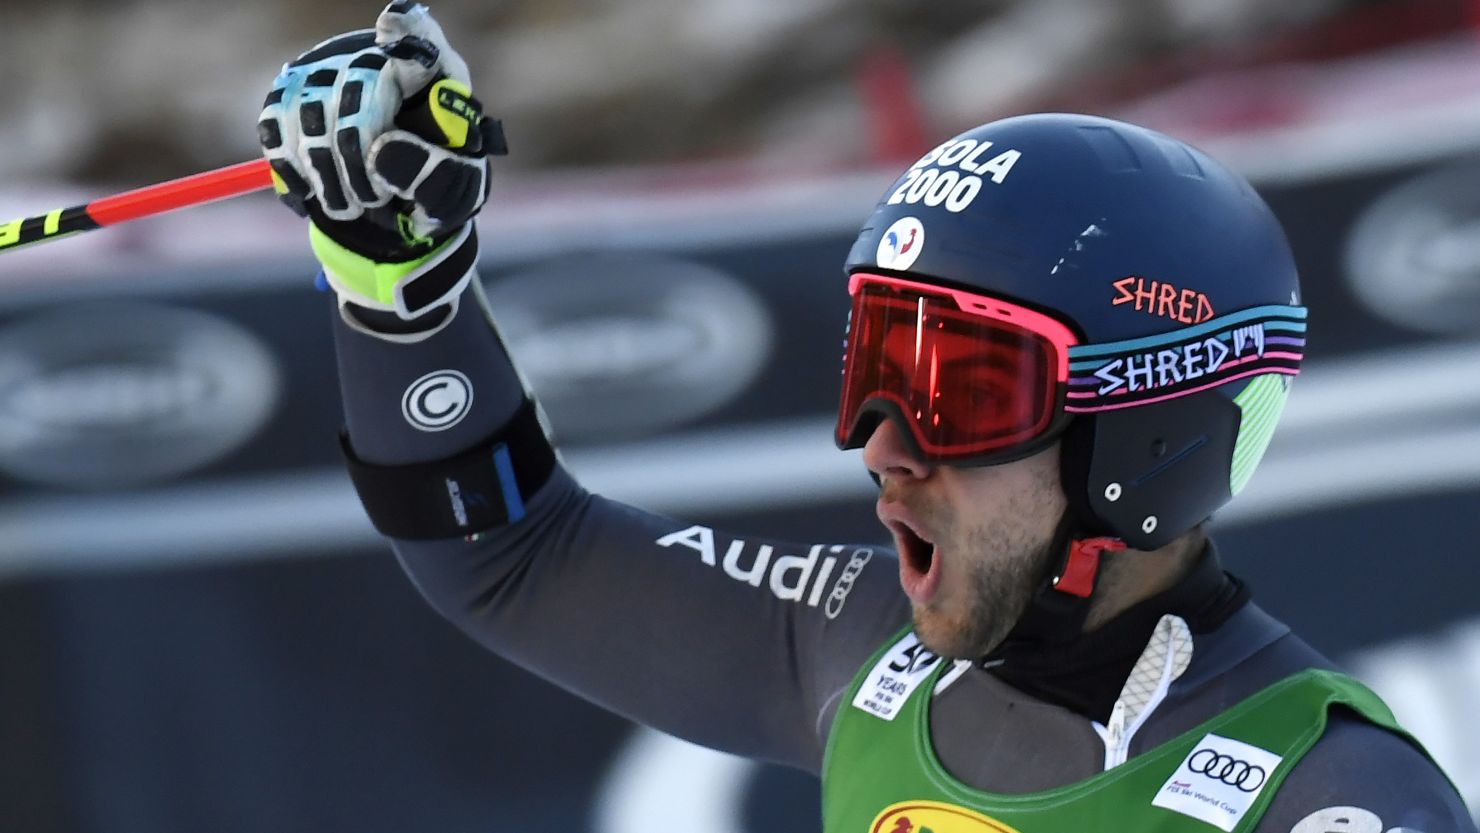 France's Mathieu Faivre was securing his maiden World Cup victory in the giant slalom at Val d'Isere.